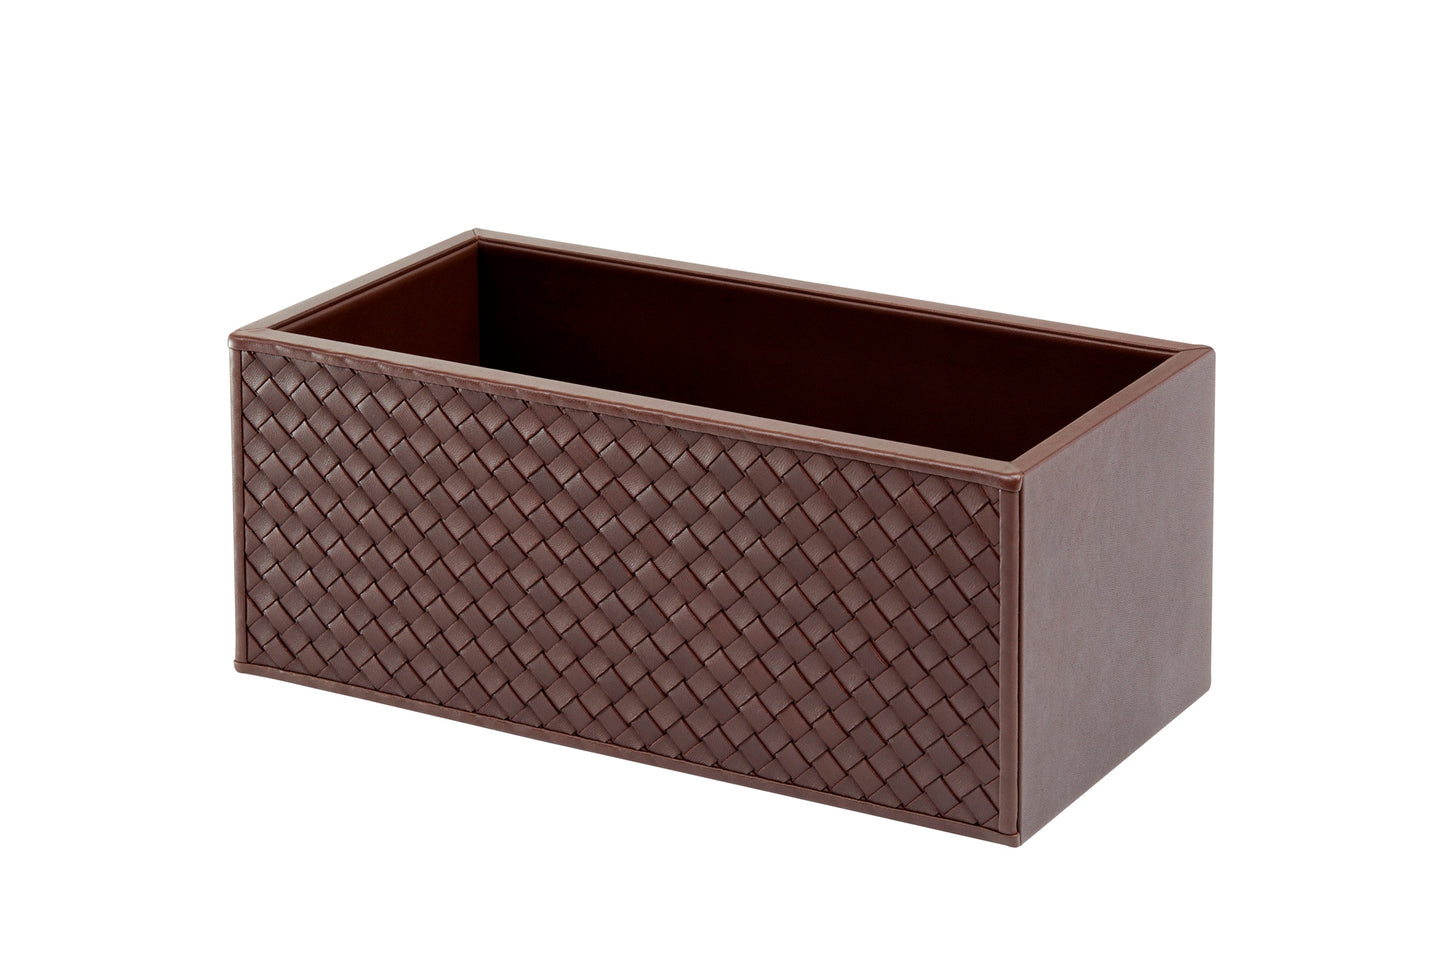 Riviere Scilla Handwoven Basket | Multi-purpose Container Box | Handwoven Leather | Perfect for Yacht Decor | Explore a Range of Luxury Home Accessories at 2Jour Concierge, #1 luxury high-end gift & lifestyle shop